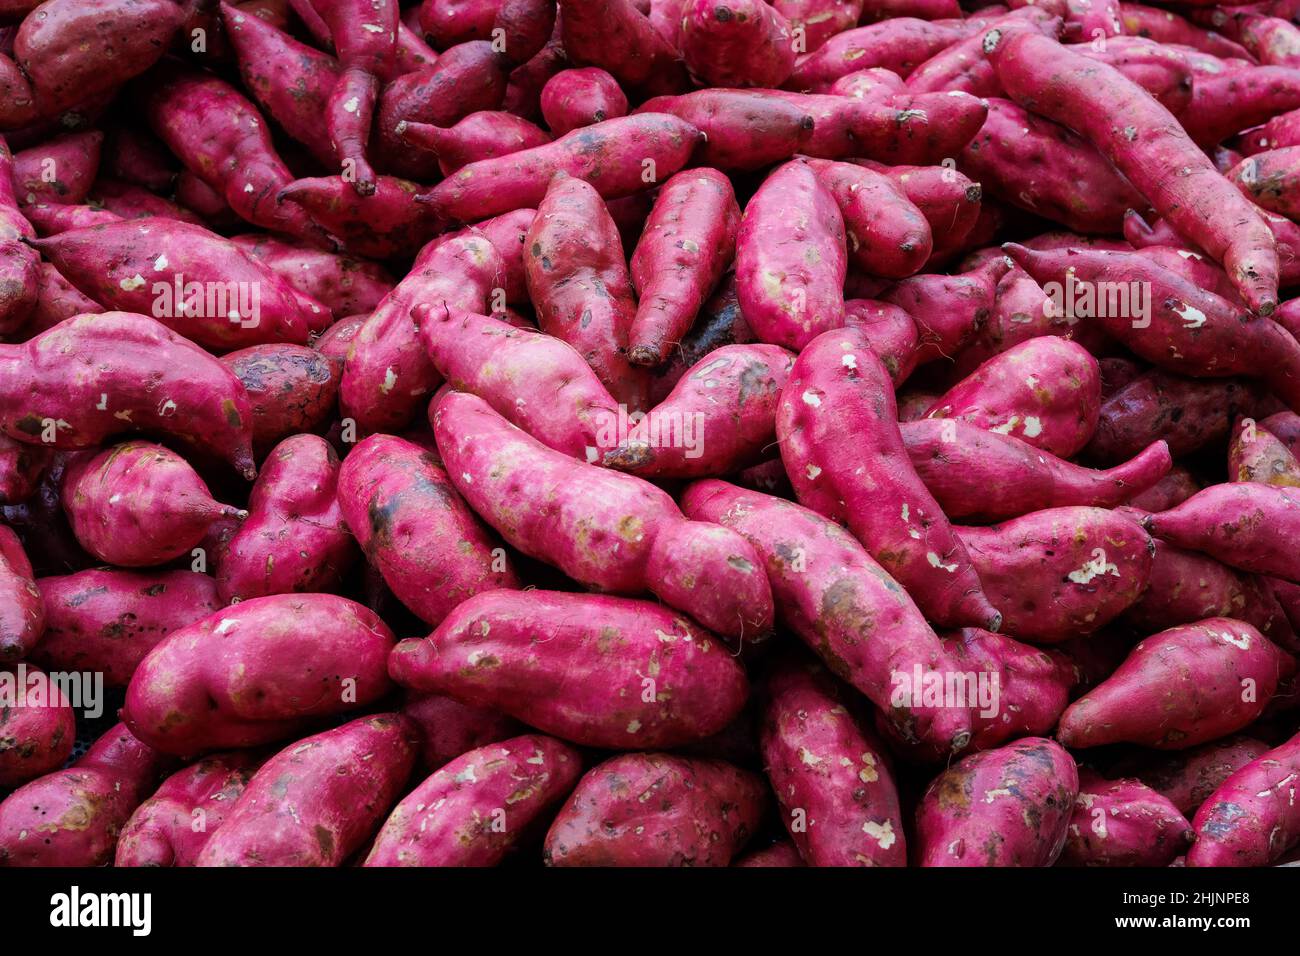 Raw, organic red sweet potatoes, Ipomoea batatas, on a market stall in Ealing, West London Stock Photo